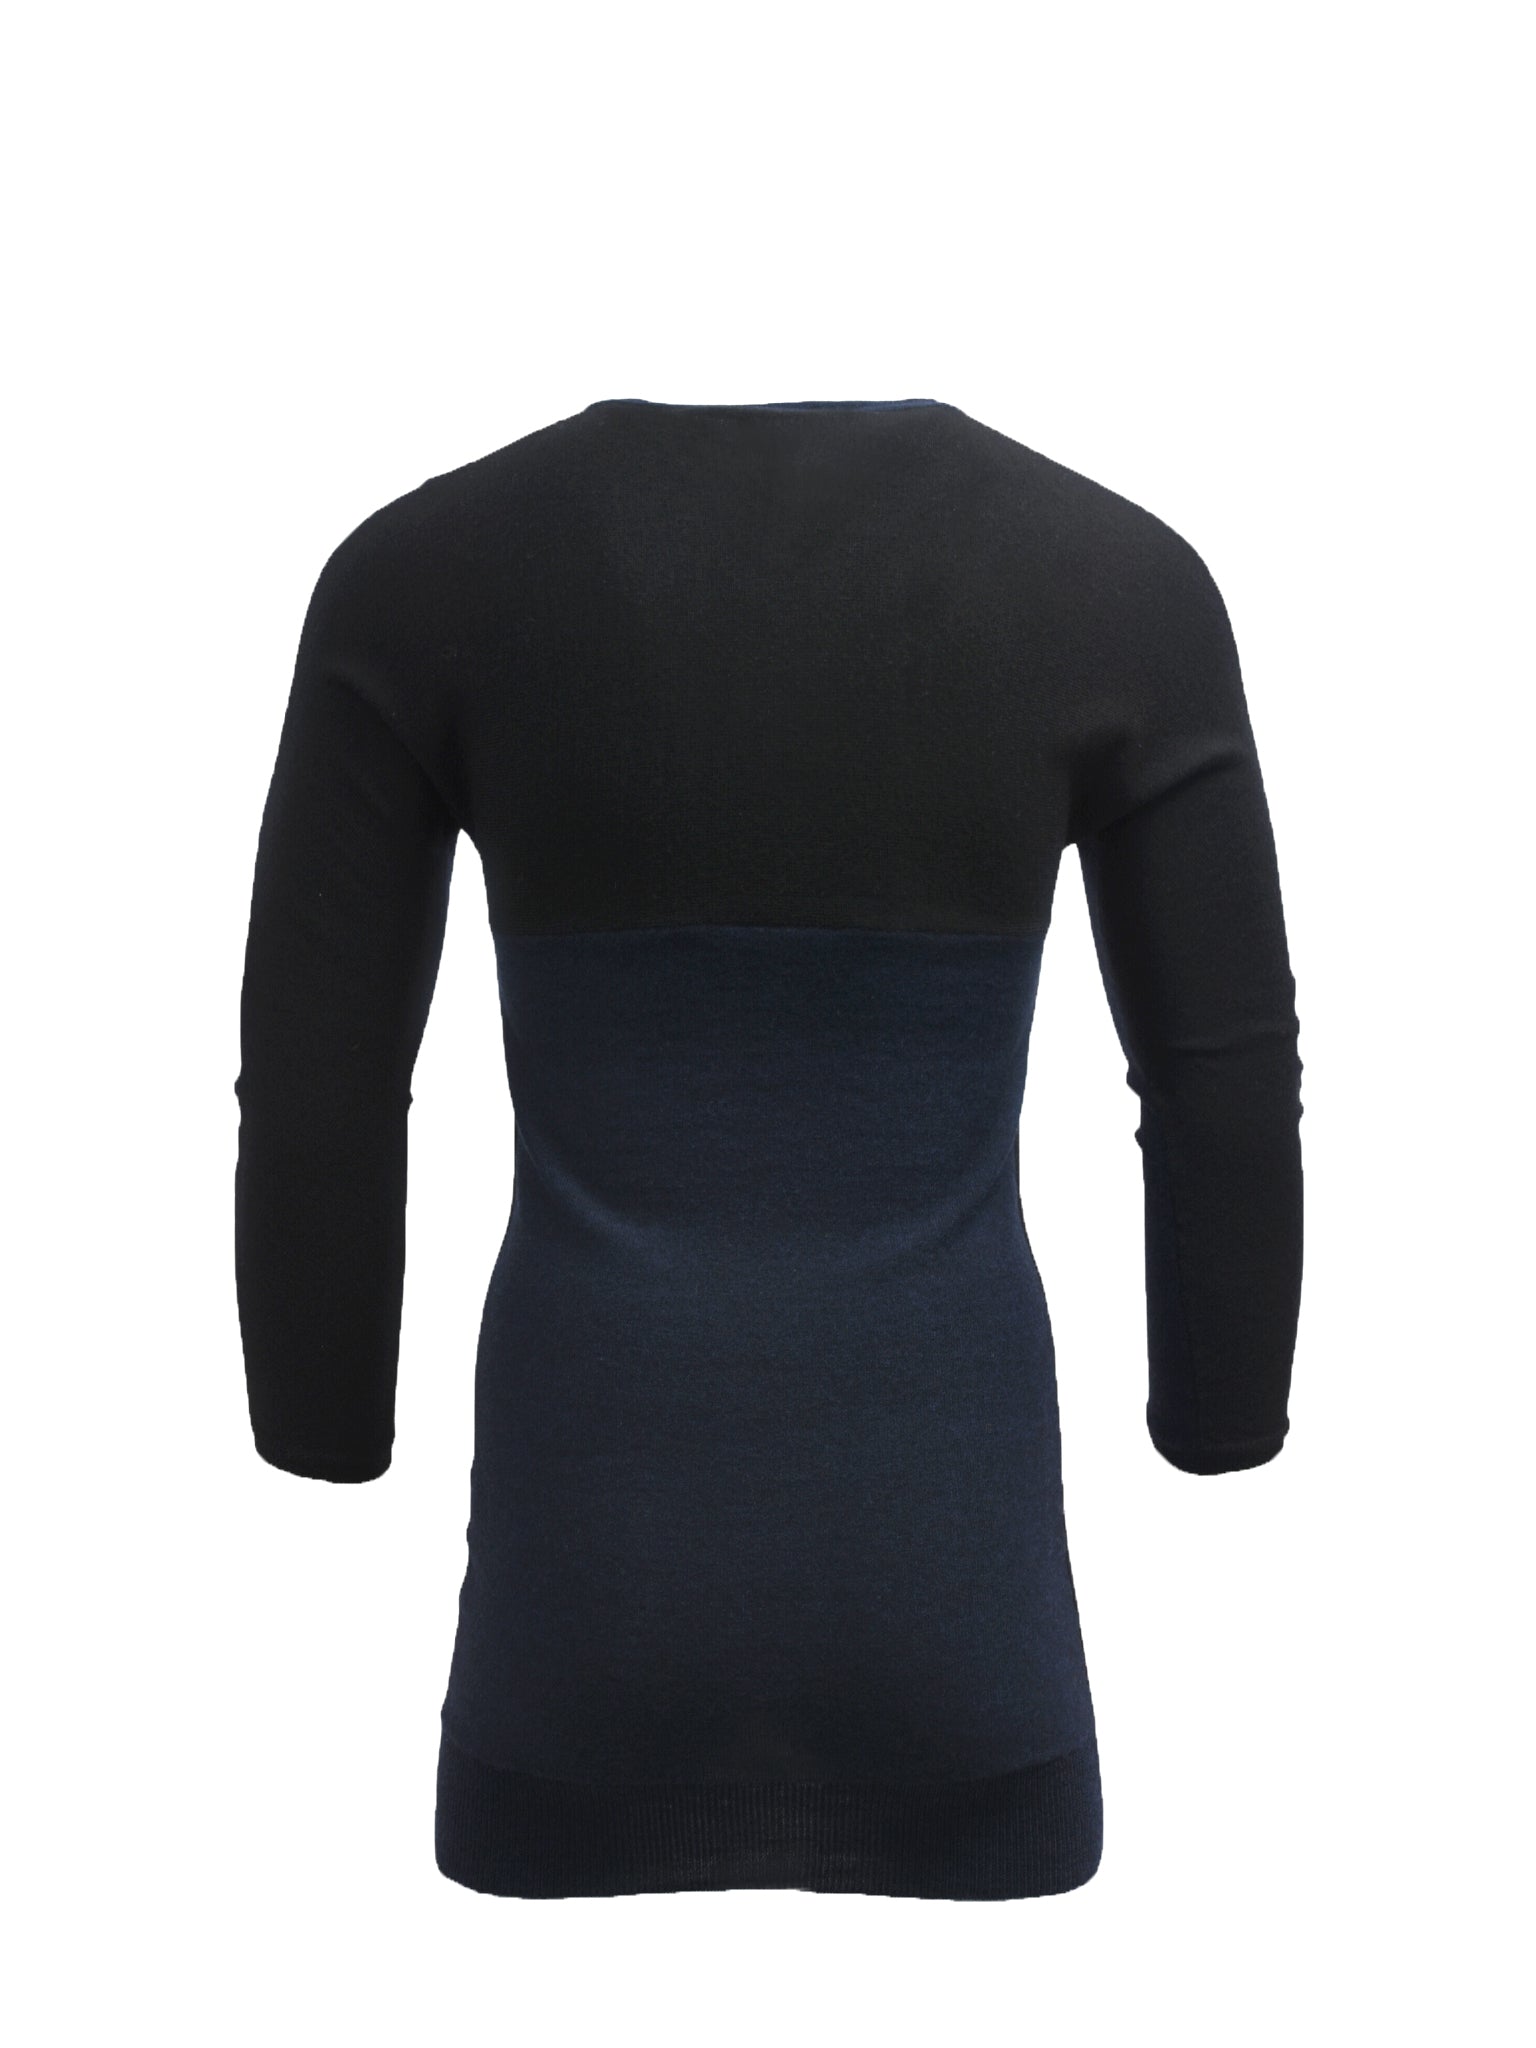 BLACK AND NAVY  LONGLINE KNITTED JUMPER